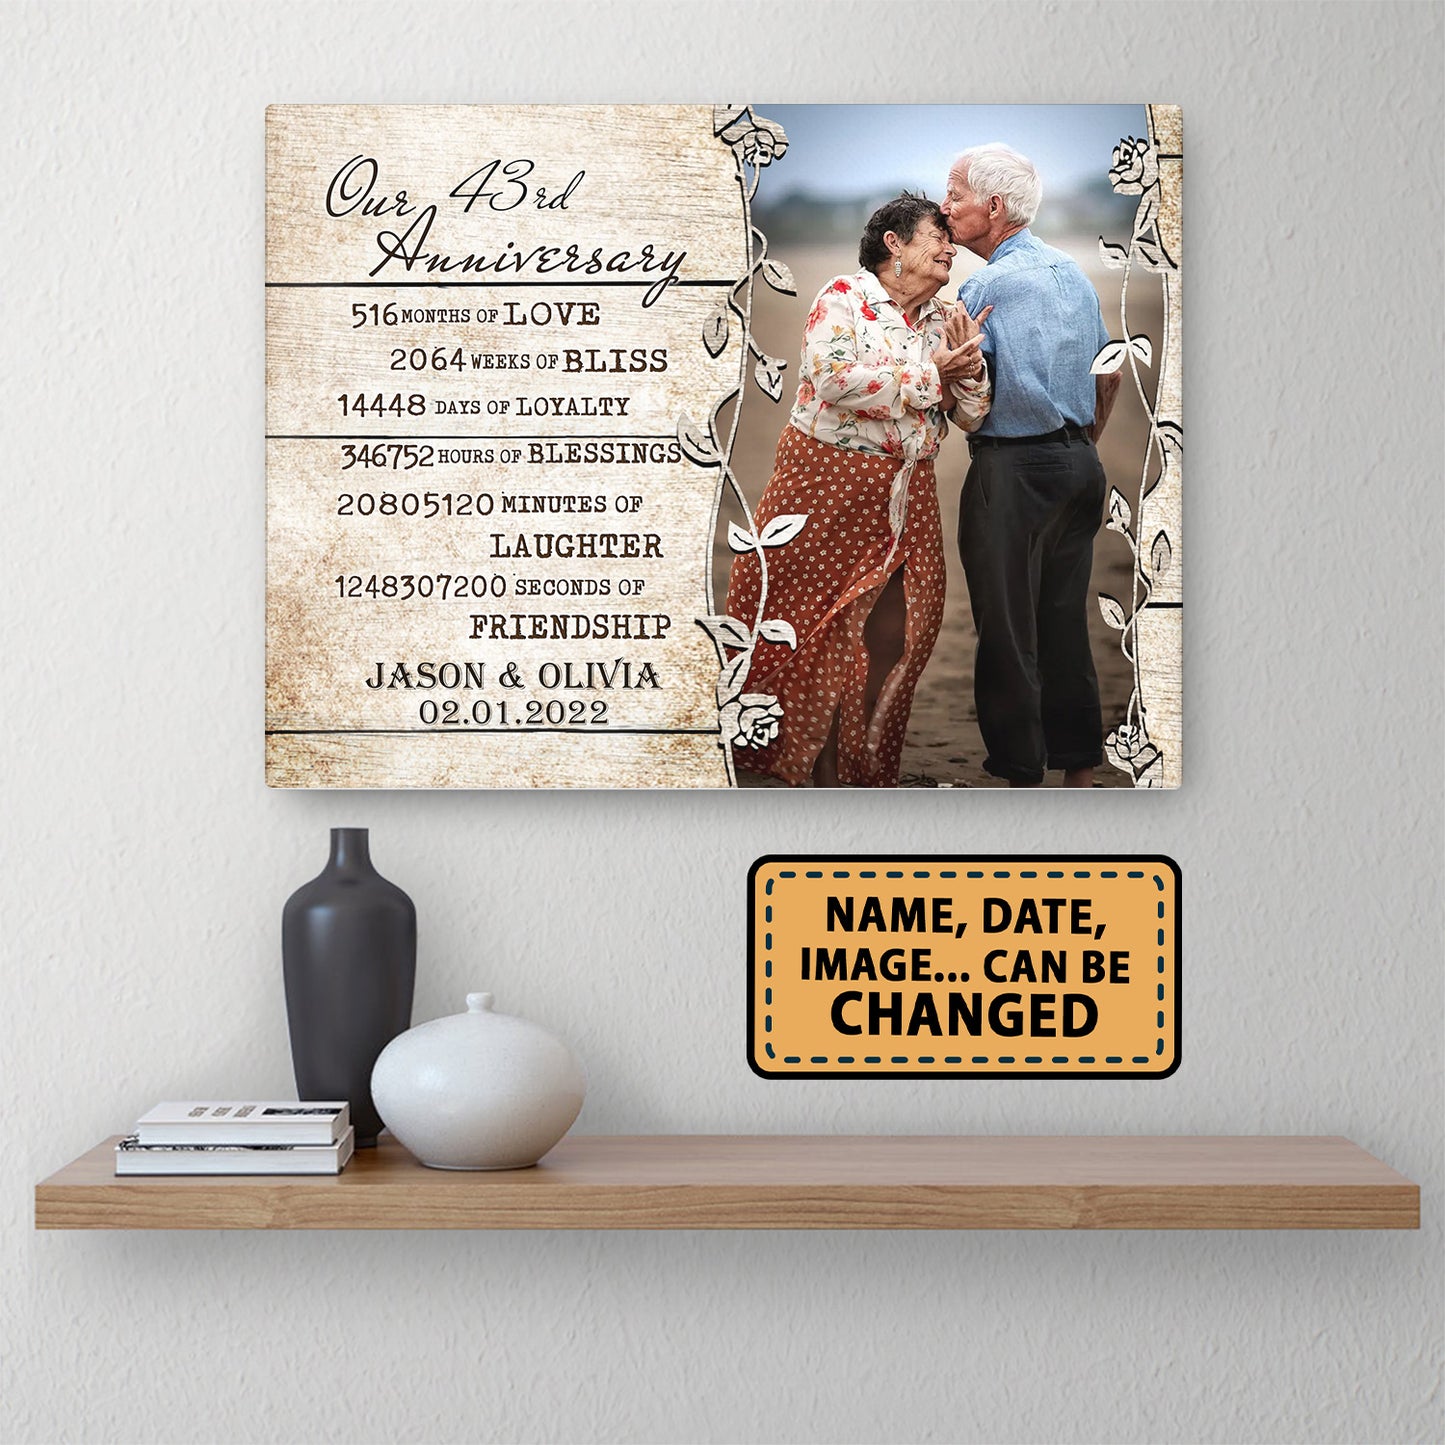 Our 43rd Anniversary Timeless love Valentine Gift Personalized Canvas